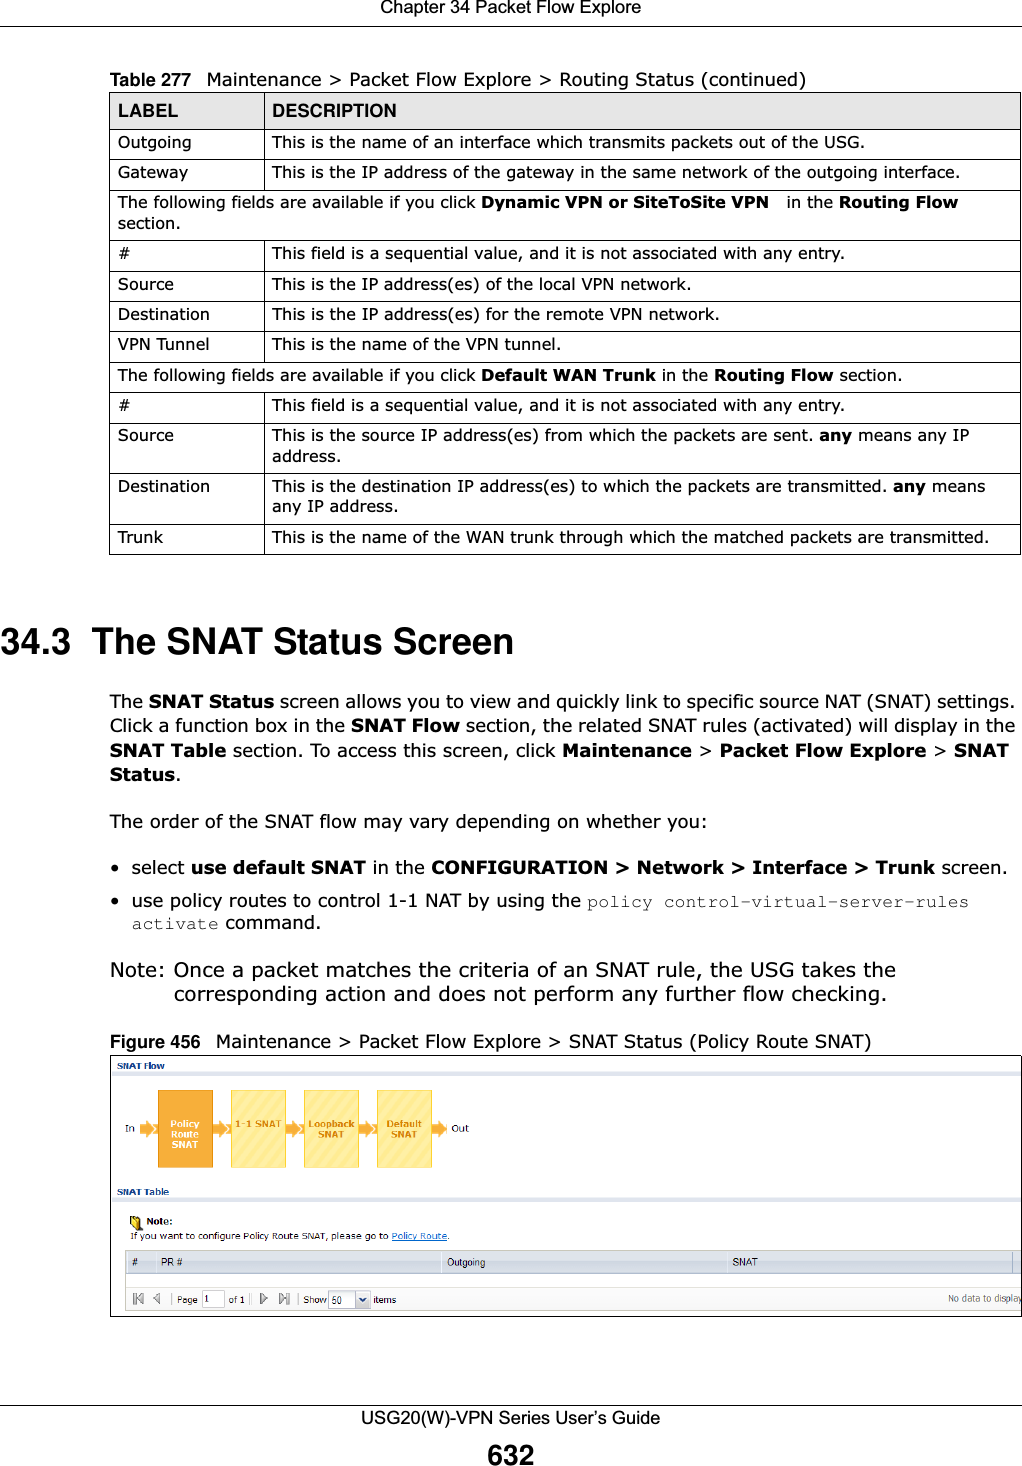 Chapter 34 Packet Flow ExploreUSG20(W)-VPN Series User’s Guide63234.3  The SNAT Status ScreenThe SNAT Status screen allows you to view and quickly link to specific source NAT (SNAT) settings. Click a function box in the SNAT Flow section, the related SNAT rules (activated) will display in the SNAT Table section. To access this screen, click Maintenance &gt; Packet Flow Explore &gt; SNAT Status.The order of the SNAT flow may vary depending on whether you:• select use default SNAT in the CONFIGURATION &gt; Network &gt; Interface &gt; Trunk screen.• use policy routes to control 1-1 NAT by using the policy control-virtual-server-rules activate command.Note: Once a packet matches the criteria of an SNAT rule, the USG takes the corresponding action and does not perform any further flow checking. Figure 456   Maintenance &gt; Packet Flow Explore &gt; SNAT Status (Policy Route SNAT)Outgoing This is the name of an interface which transmits packets out of the USG.Gateway This is the IP address of the gateway in the same network of the outgoing interface.The following fields are available if you click Dynamic VPN or SiteToSite VPN   in the Routing Flow section.#This field is a sequential value, and it is not associated with any entry.Source This is the IP address(es) of the local VPN network.Destination This is the IP address(es) for the remote VPN network.VPN Tunnel This is the name of the VPN tunnel.The following fields are available if you click Default WAN Trunk in the Routing Flow section.#This field is a sequential value, and it is not associated with any entry.Source This is the source IP address(es) from which the packets are sent. any means any IP address.Destination This is the destination IP address(es) to which the packets are transmitted. any means any IP address.Trunk This is the name of the WAN trunk through which the matched packets are transmitted.Table 277   Maintenance &gt; Packet Flow Explore &gt; Routing Status (continued)LABEL DESCRIPTION